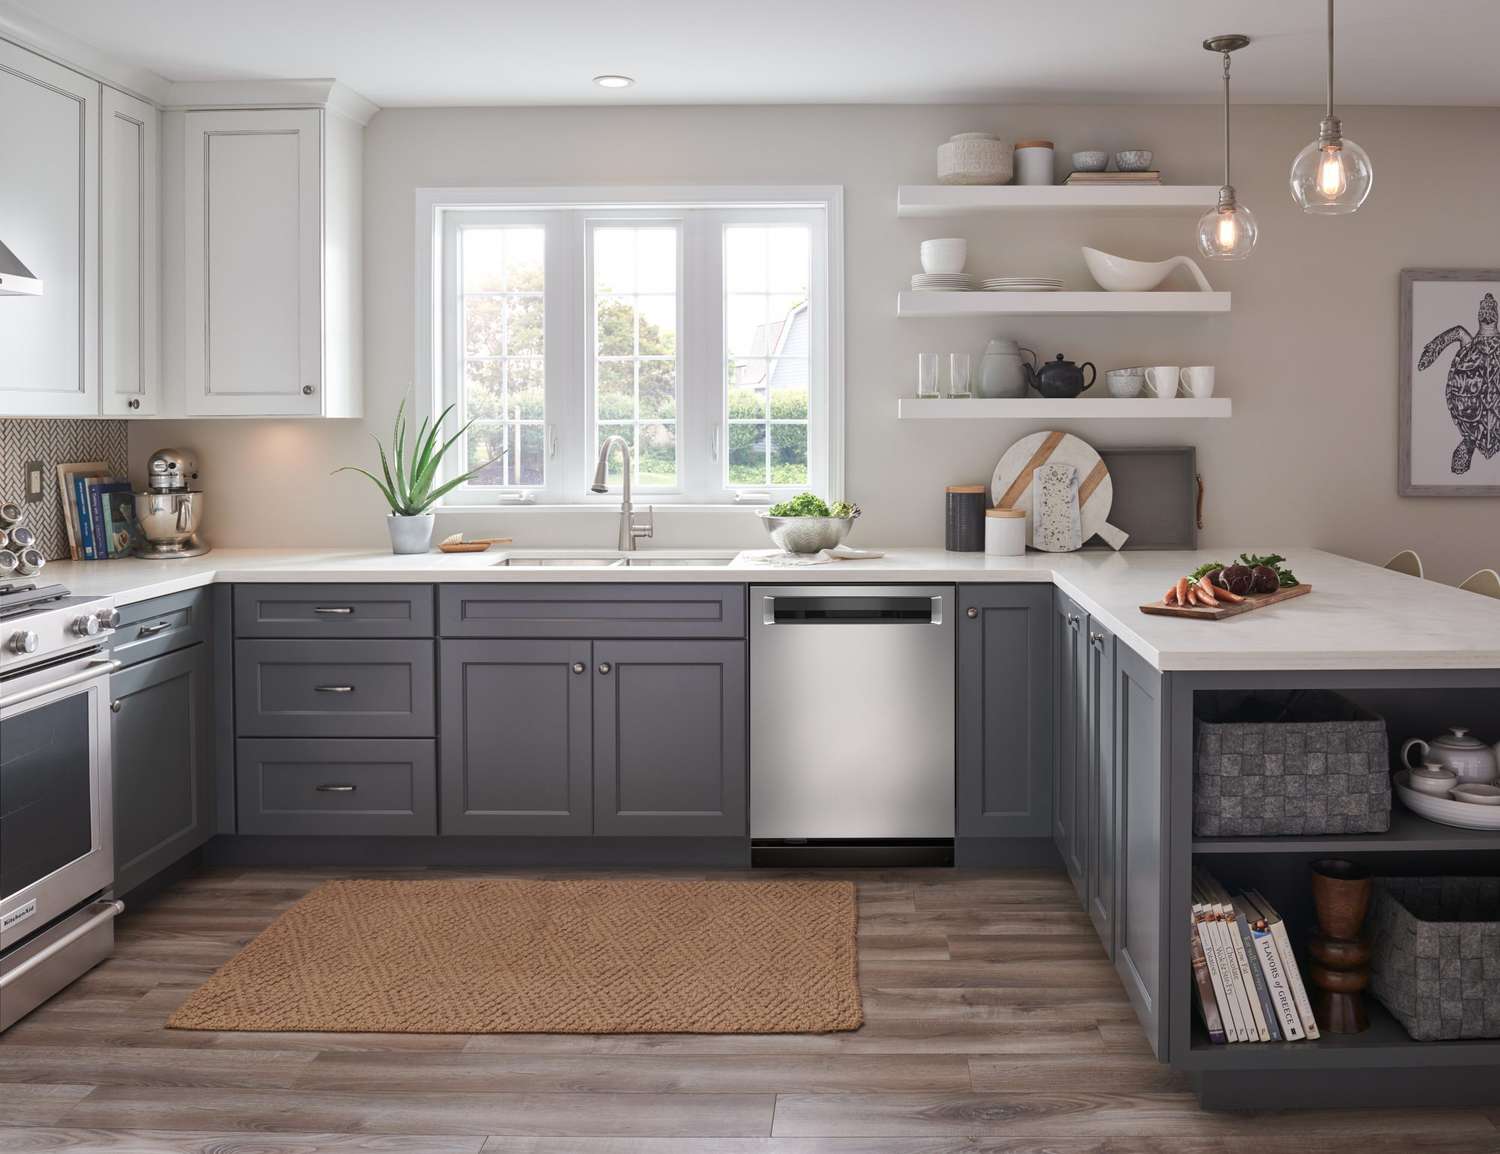 Pictures in Kitchen Ideas 